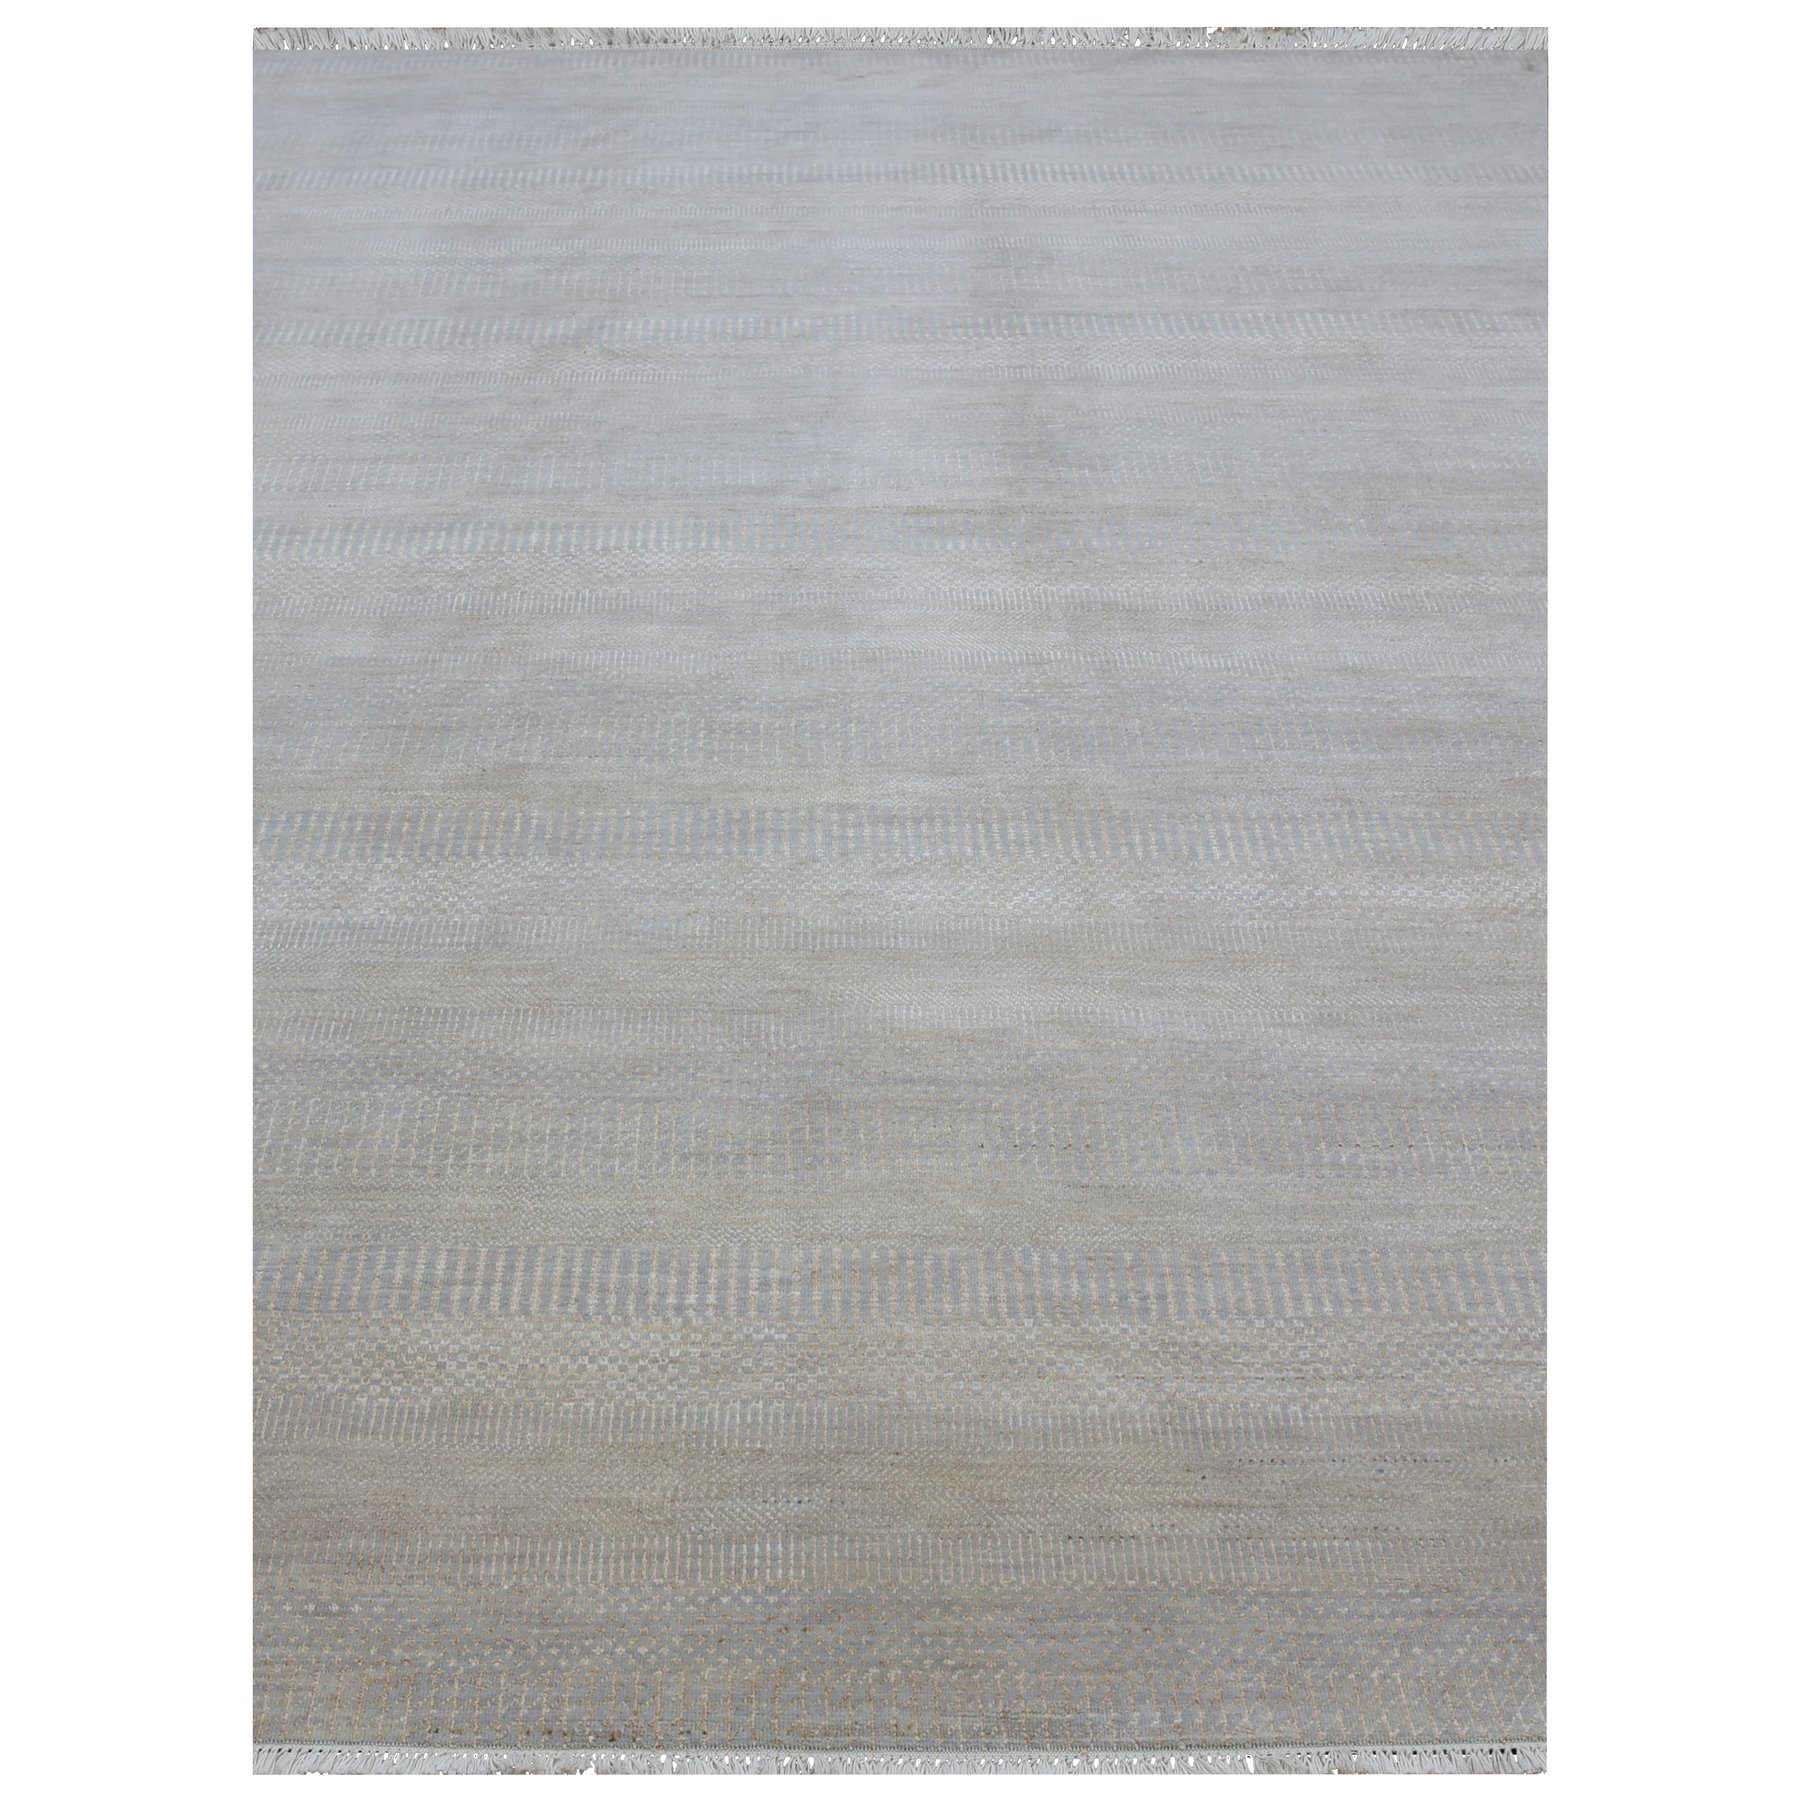 Cloudy Gray, Hand Knotted Grass Design, Tone on Tone Pure Wool, Densely Woven Oriental Rug 